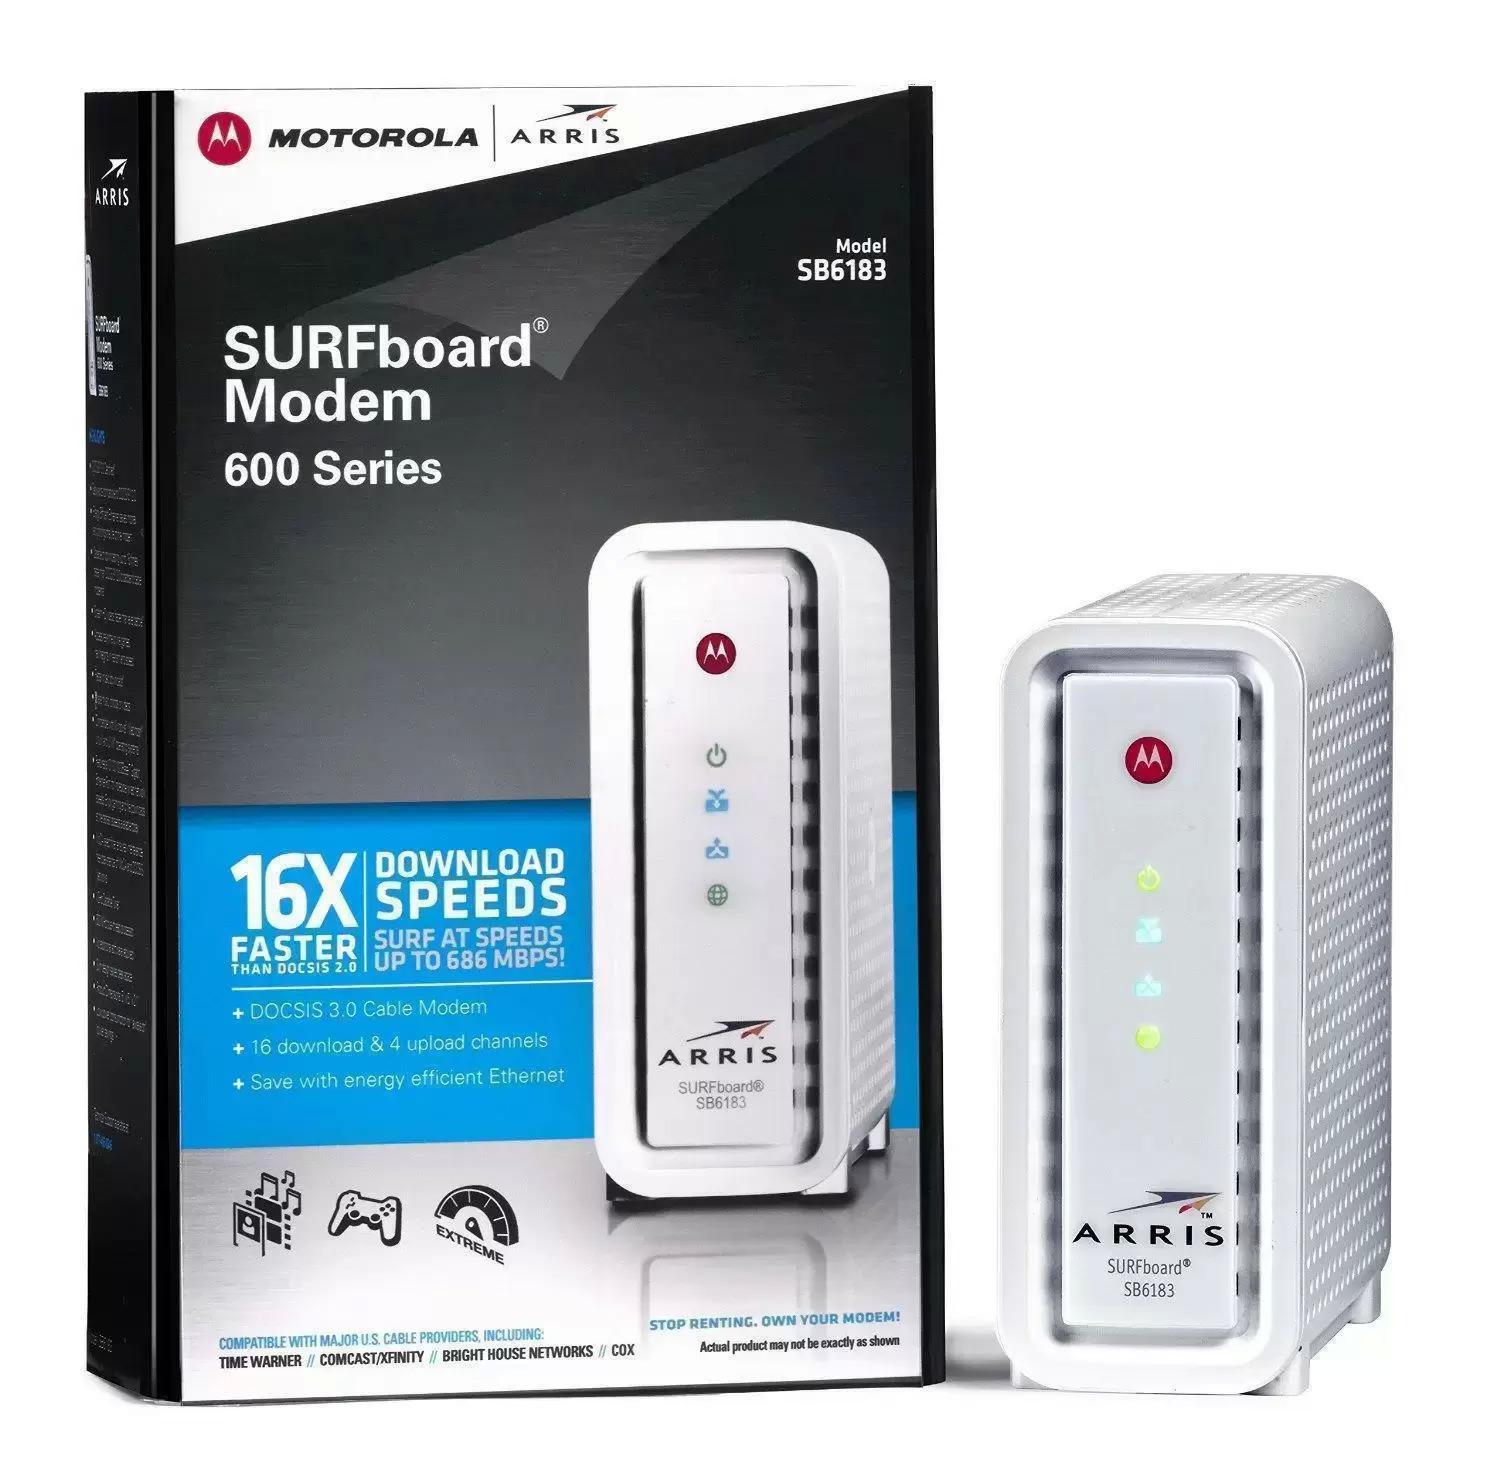 Motorola ARRIS SurfBoard SB6183 Cable Modem for $54.99 Shipped